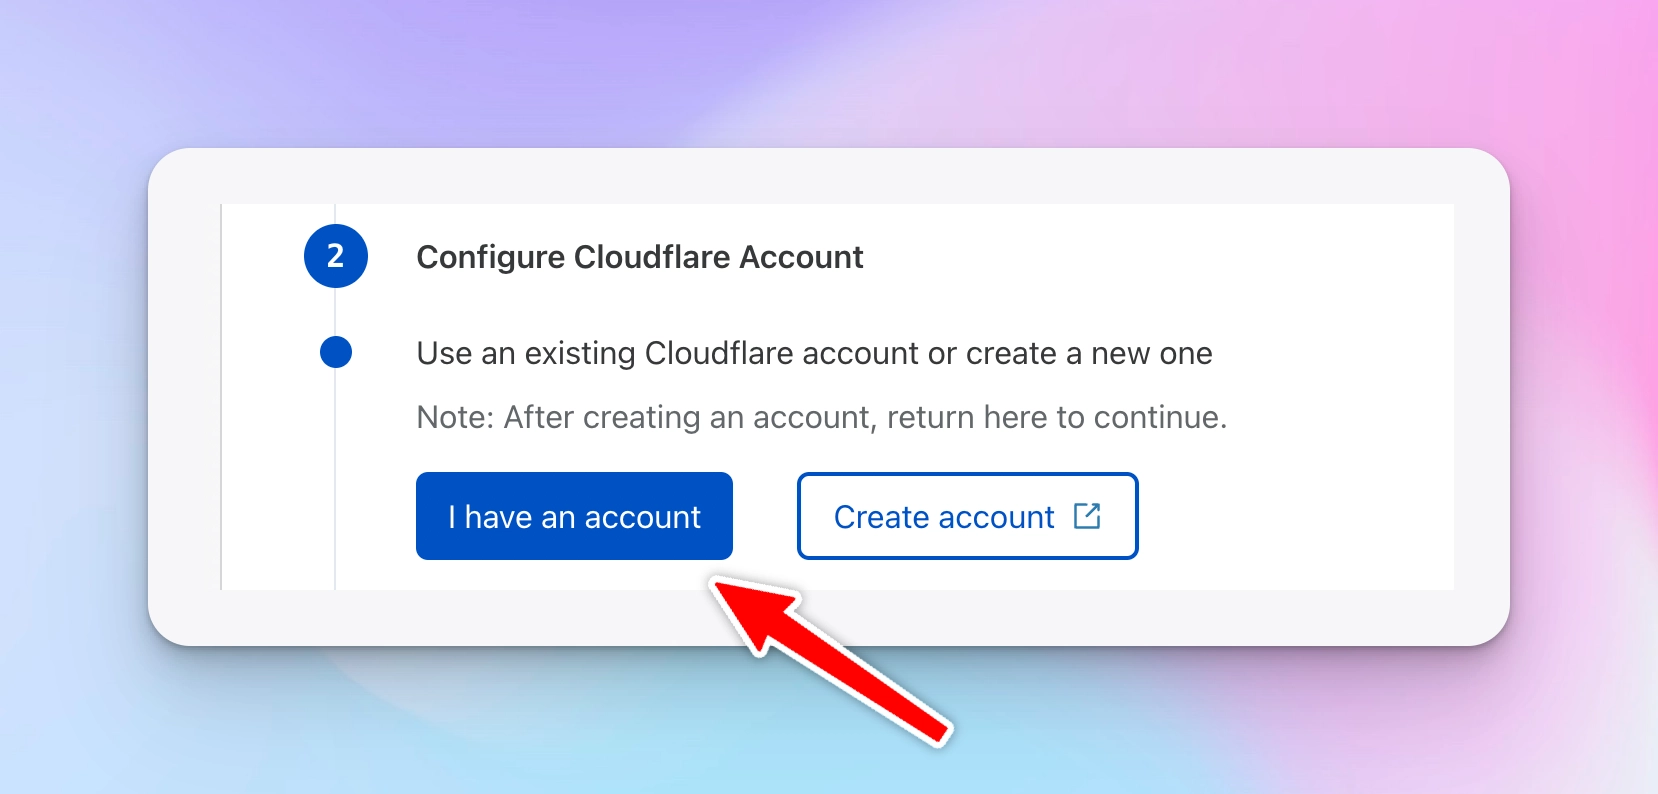 I have an account on Cloudflare workers deployment